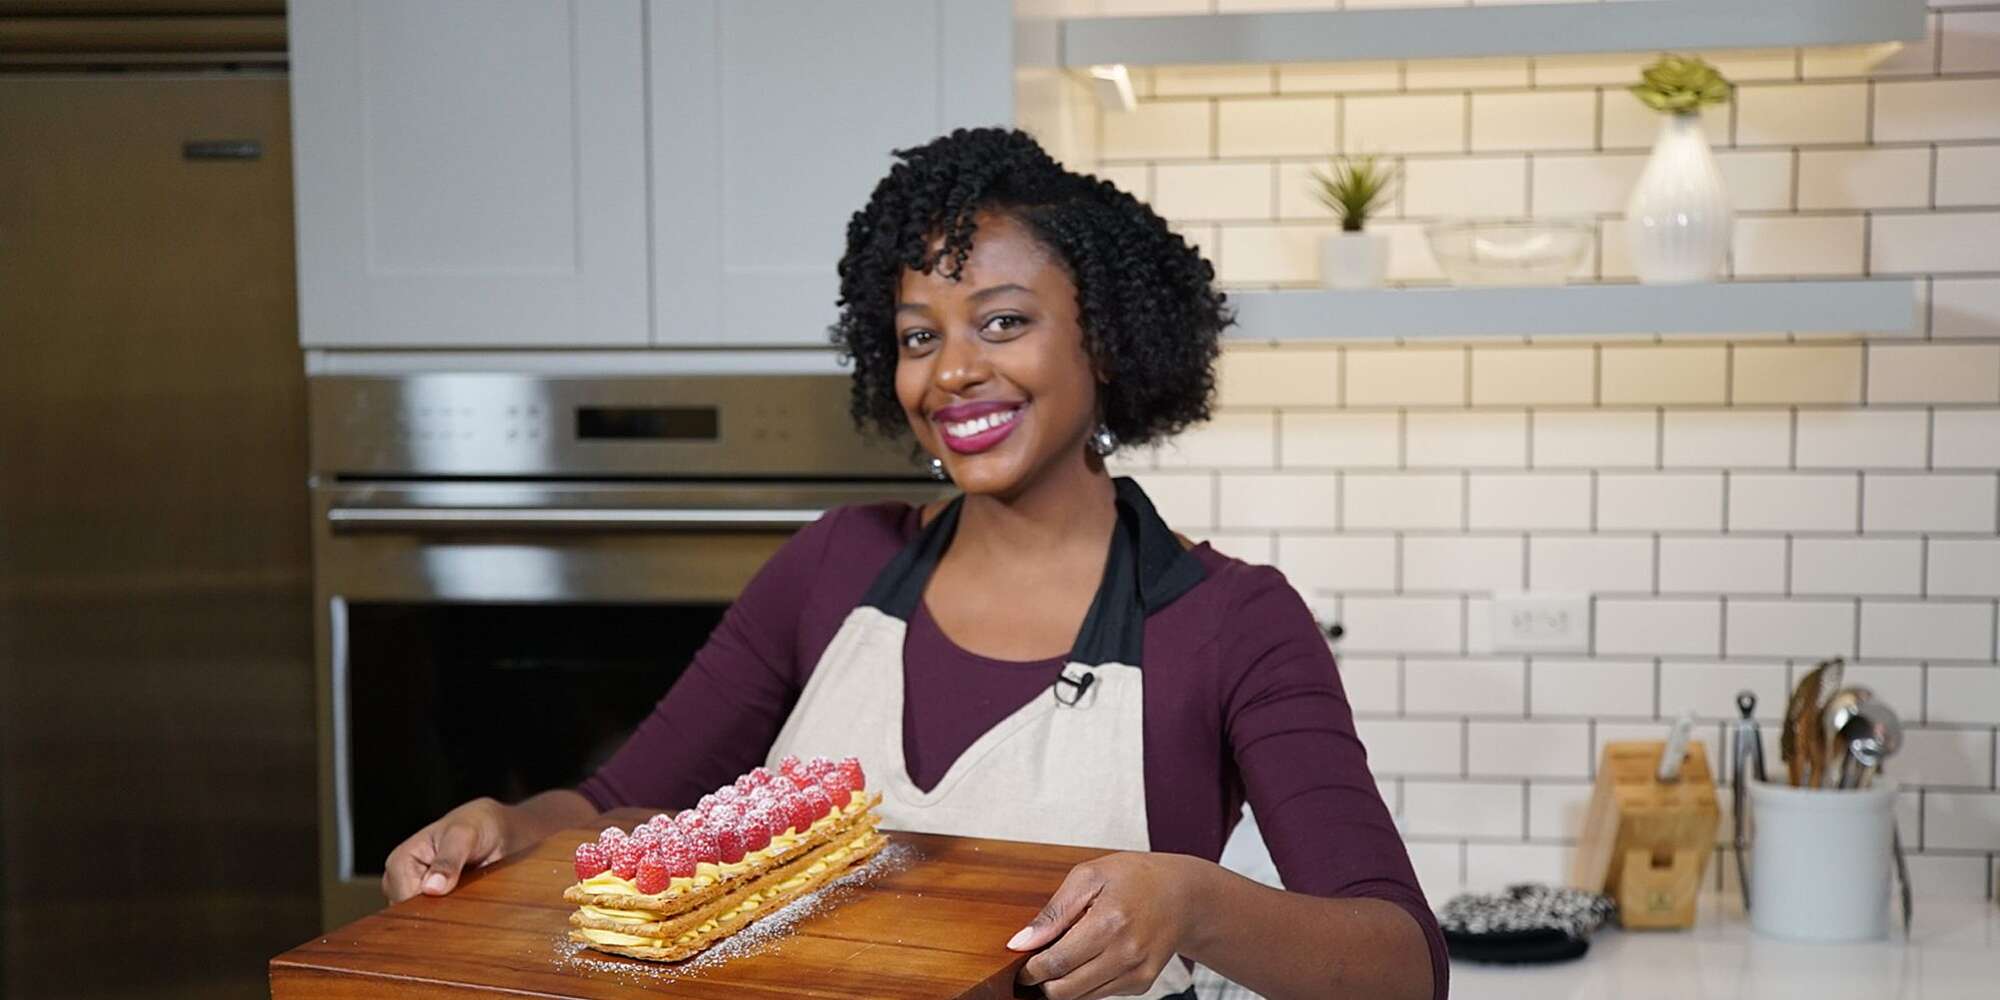 Great American Baking Show Winner Vallery Lomas Makes a MilleFeuille